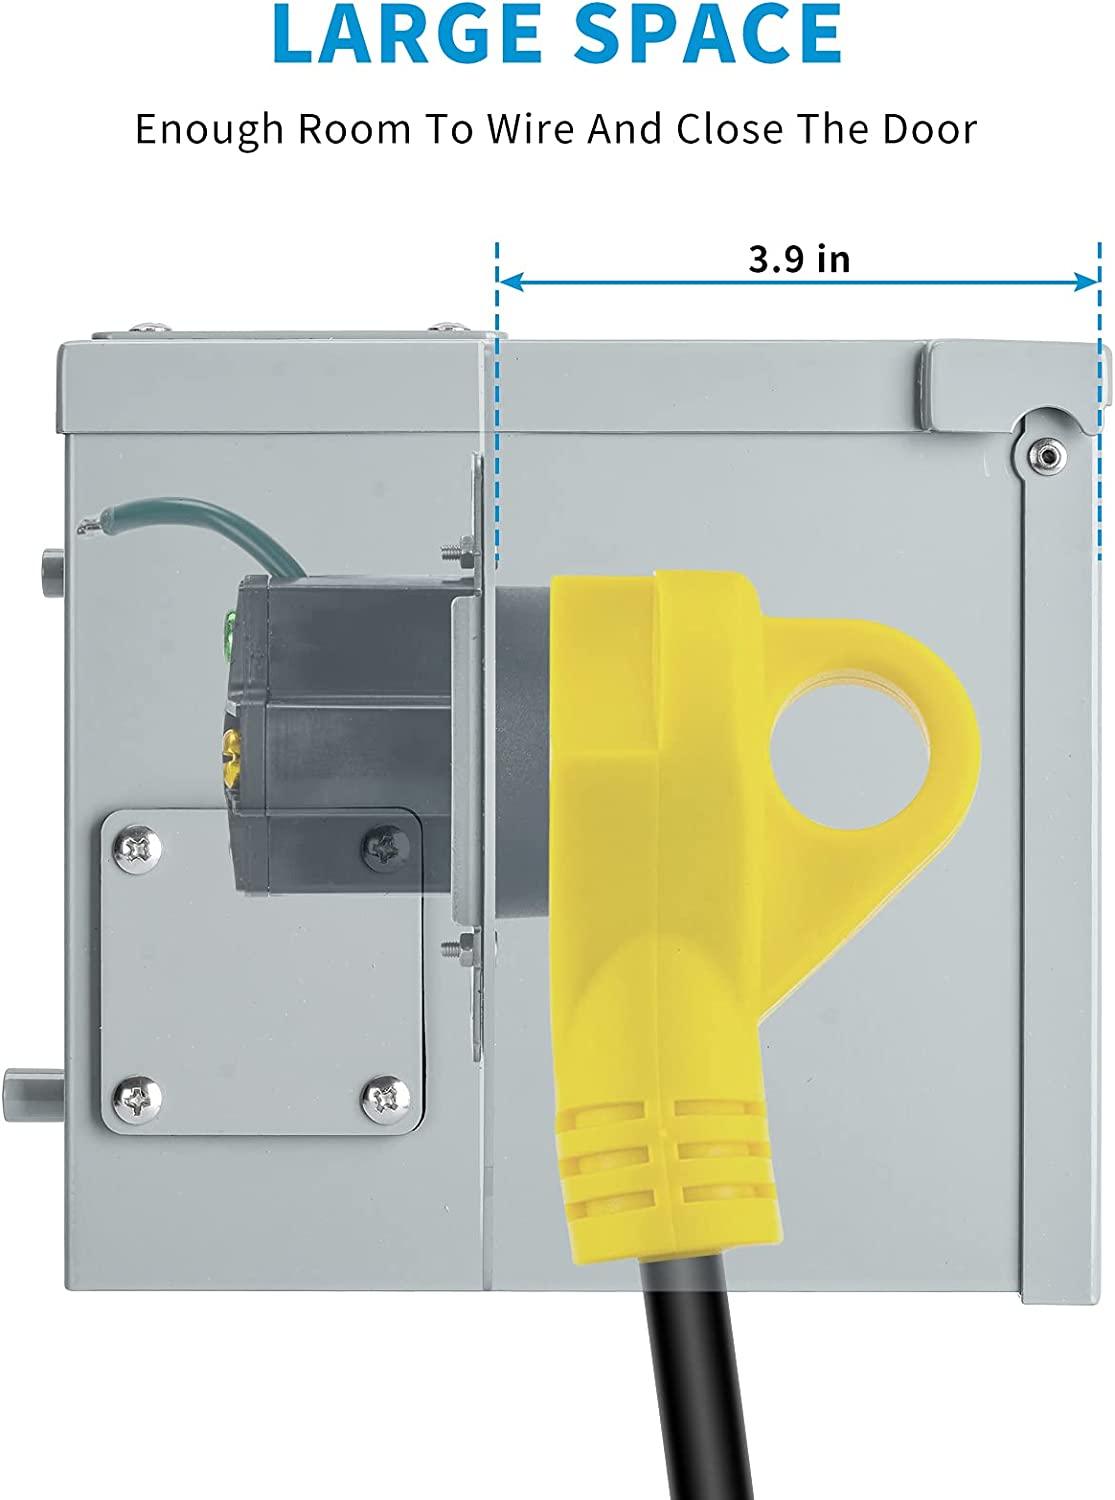 50 Amp RV Power Outlet Box, 125/250 Volt NEMA 14-50R RV Receptacle, Enclosed Weatherproof Lockable Outdoor Electrical Panel Outlet for RV Camper Travel Trailer Electric Car